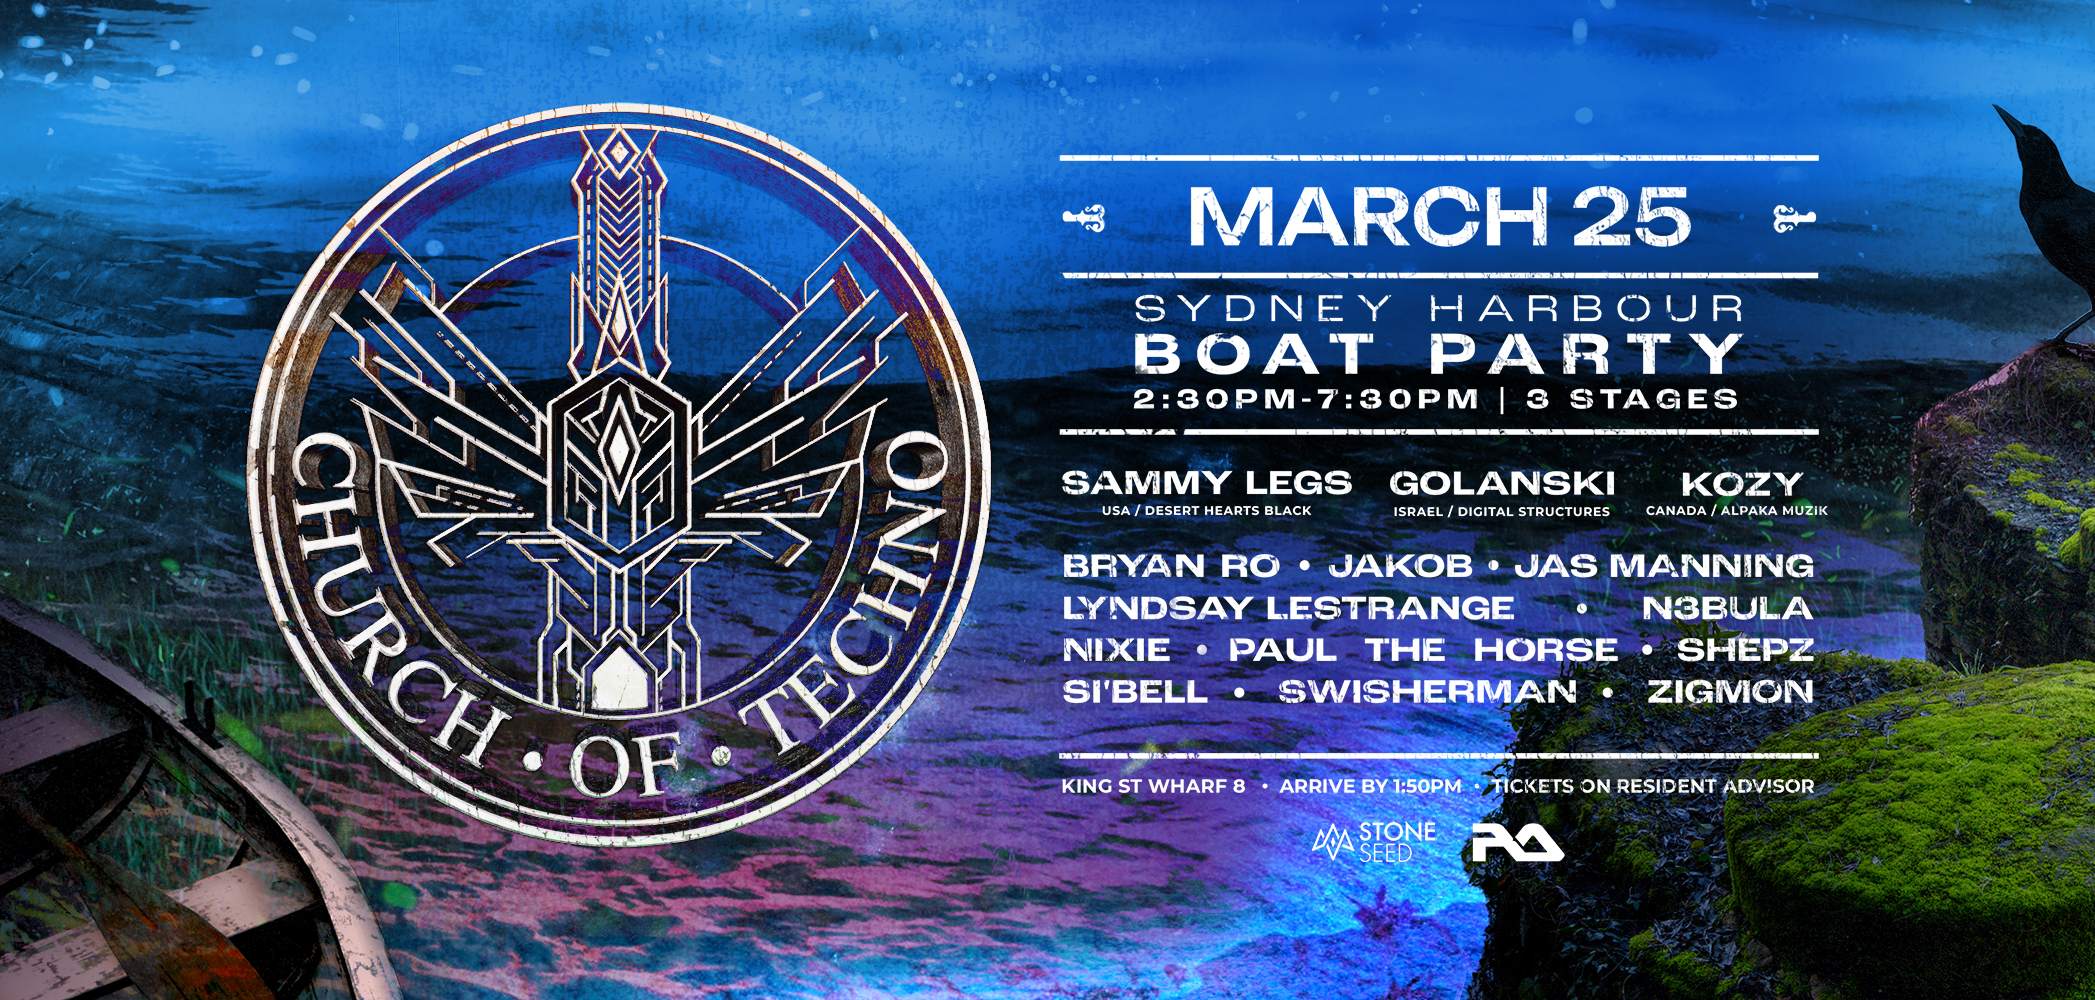 [CANCELLED] Church of Techno - Boat Party - 3 Levels / 3 Stages - フライヤー表